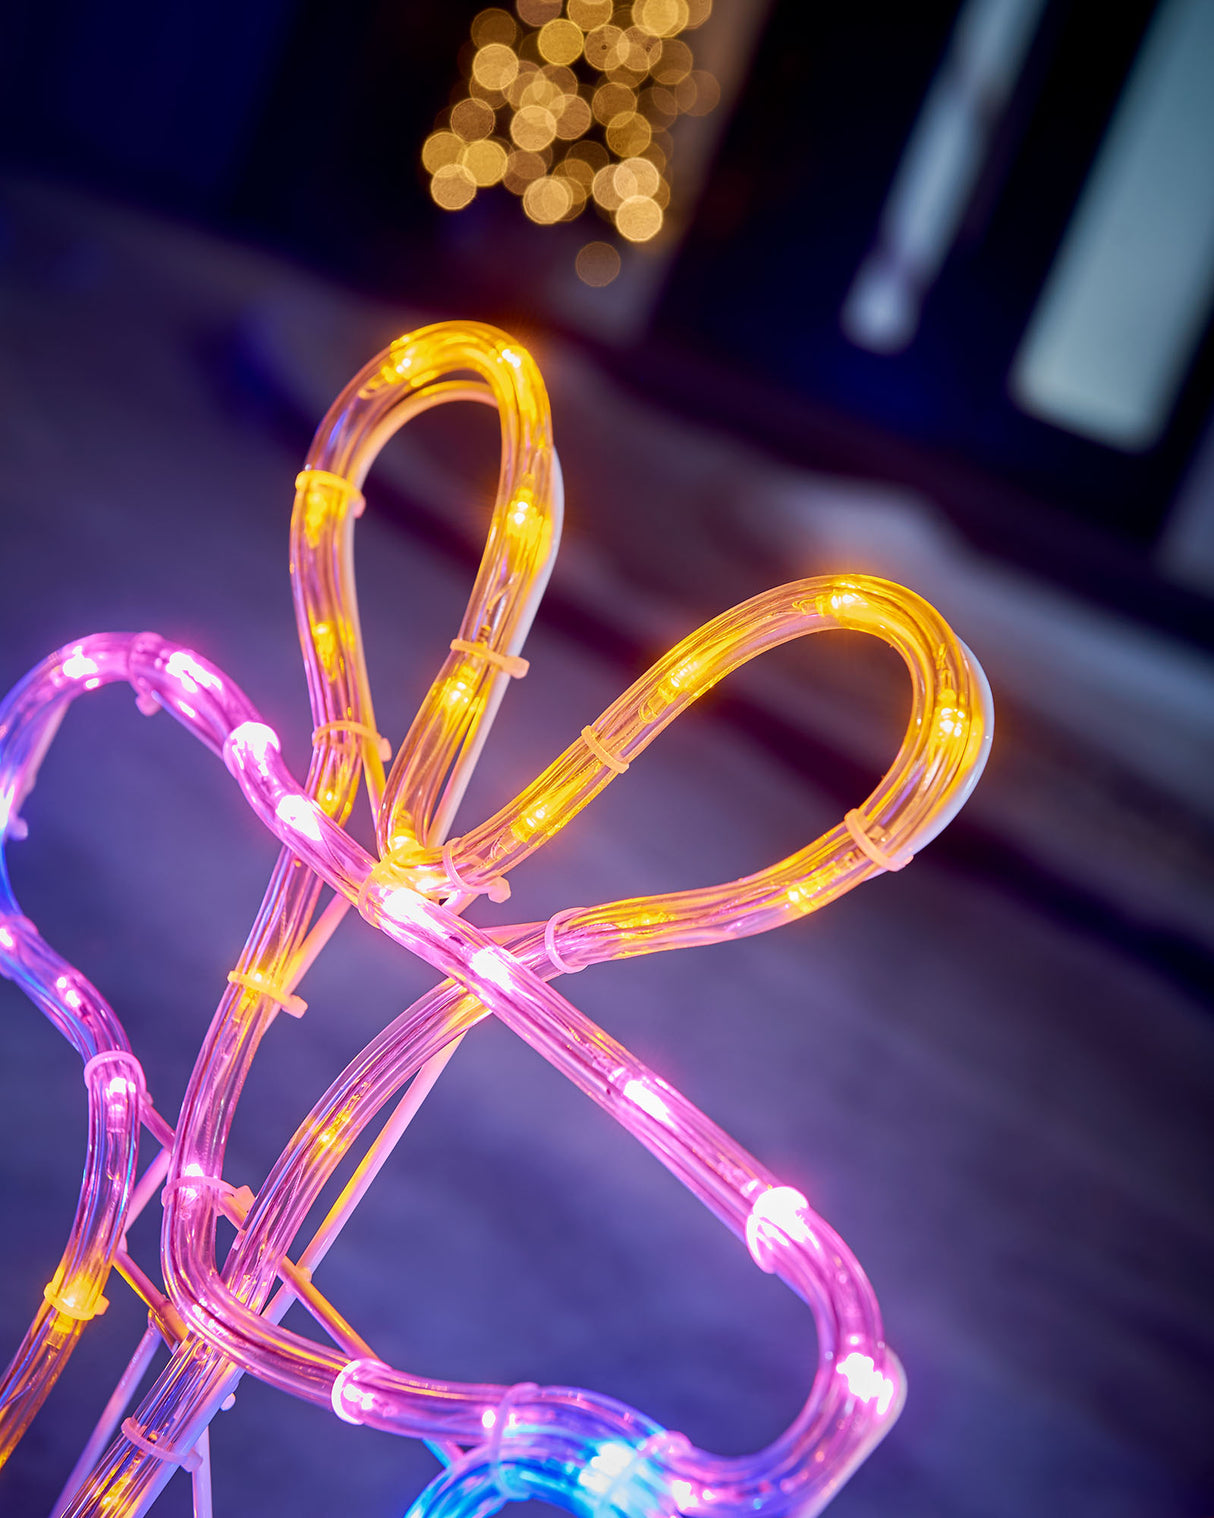 Set of 3 LED Presents Rope Light Silhouette, 99 cm